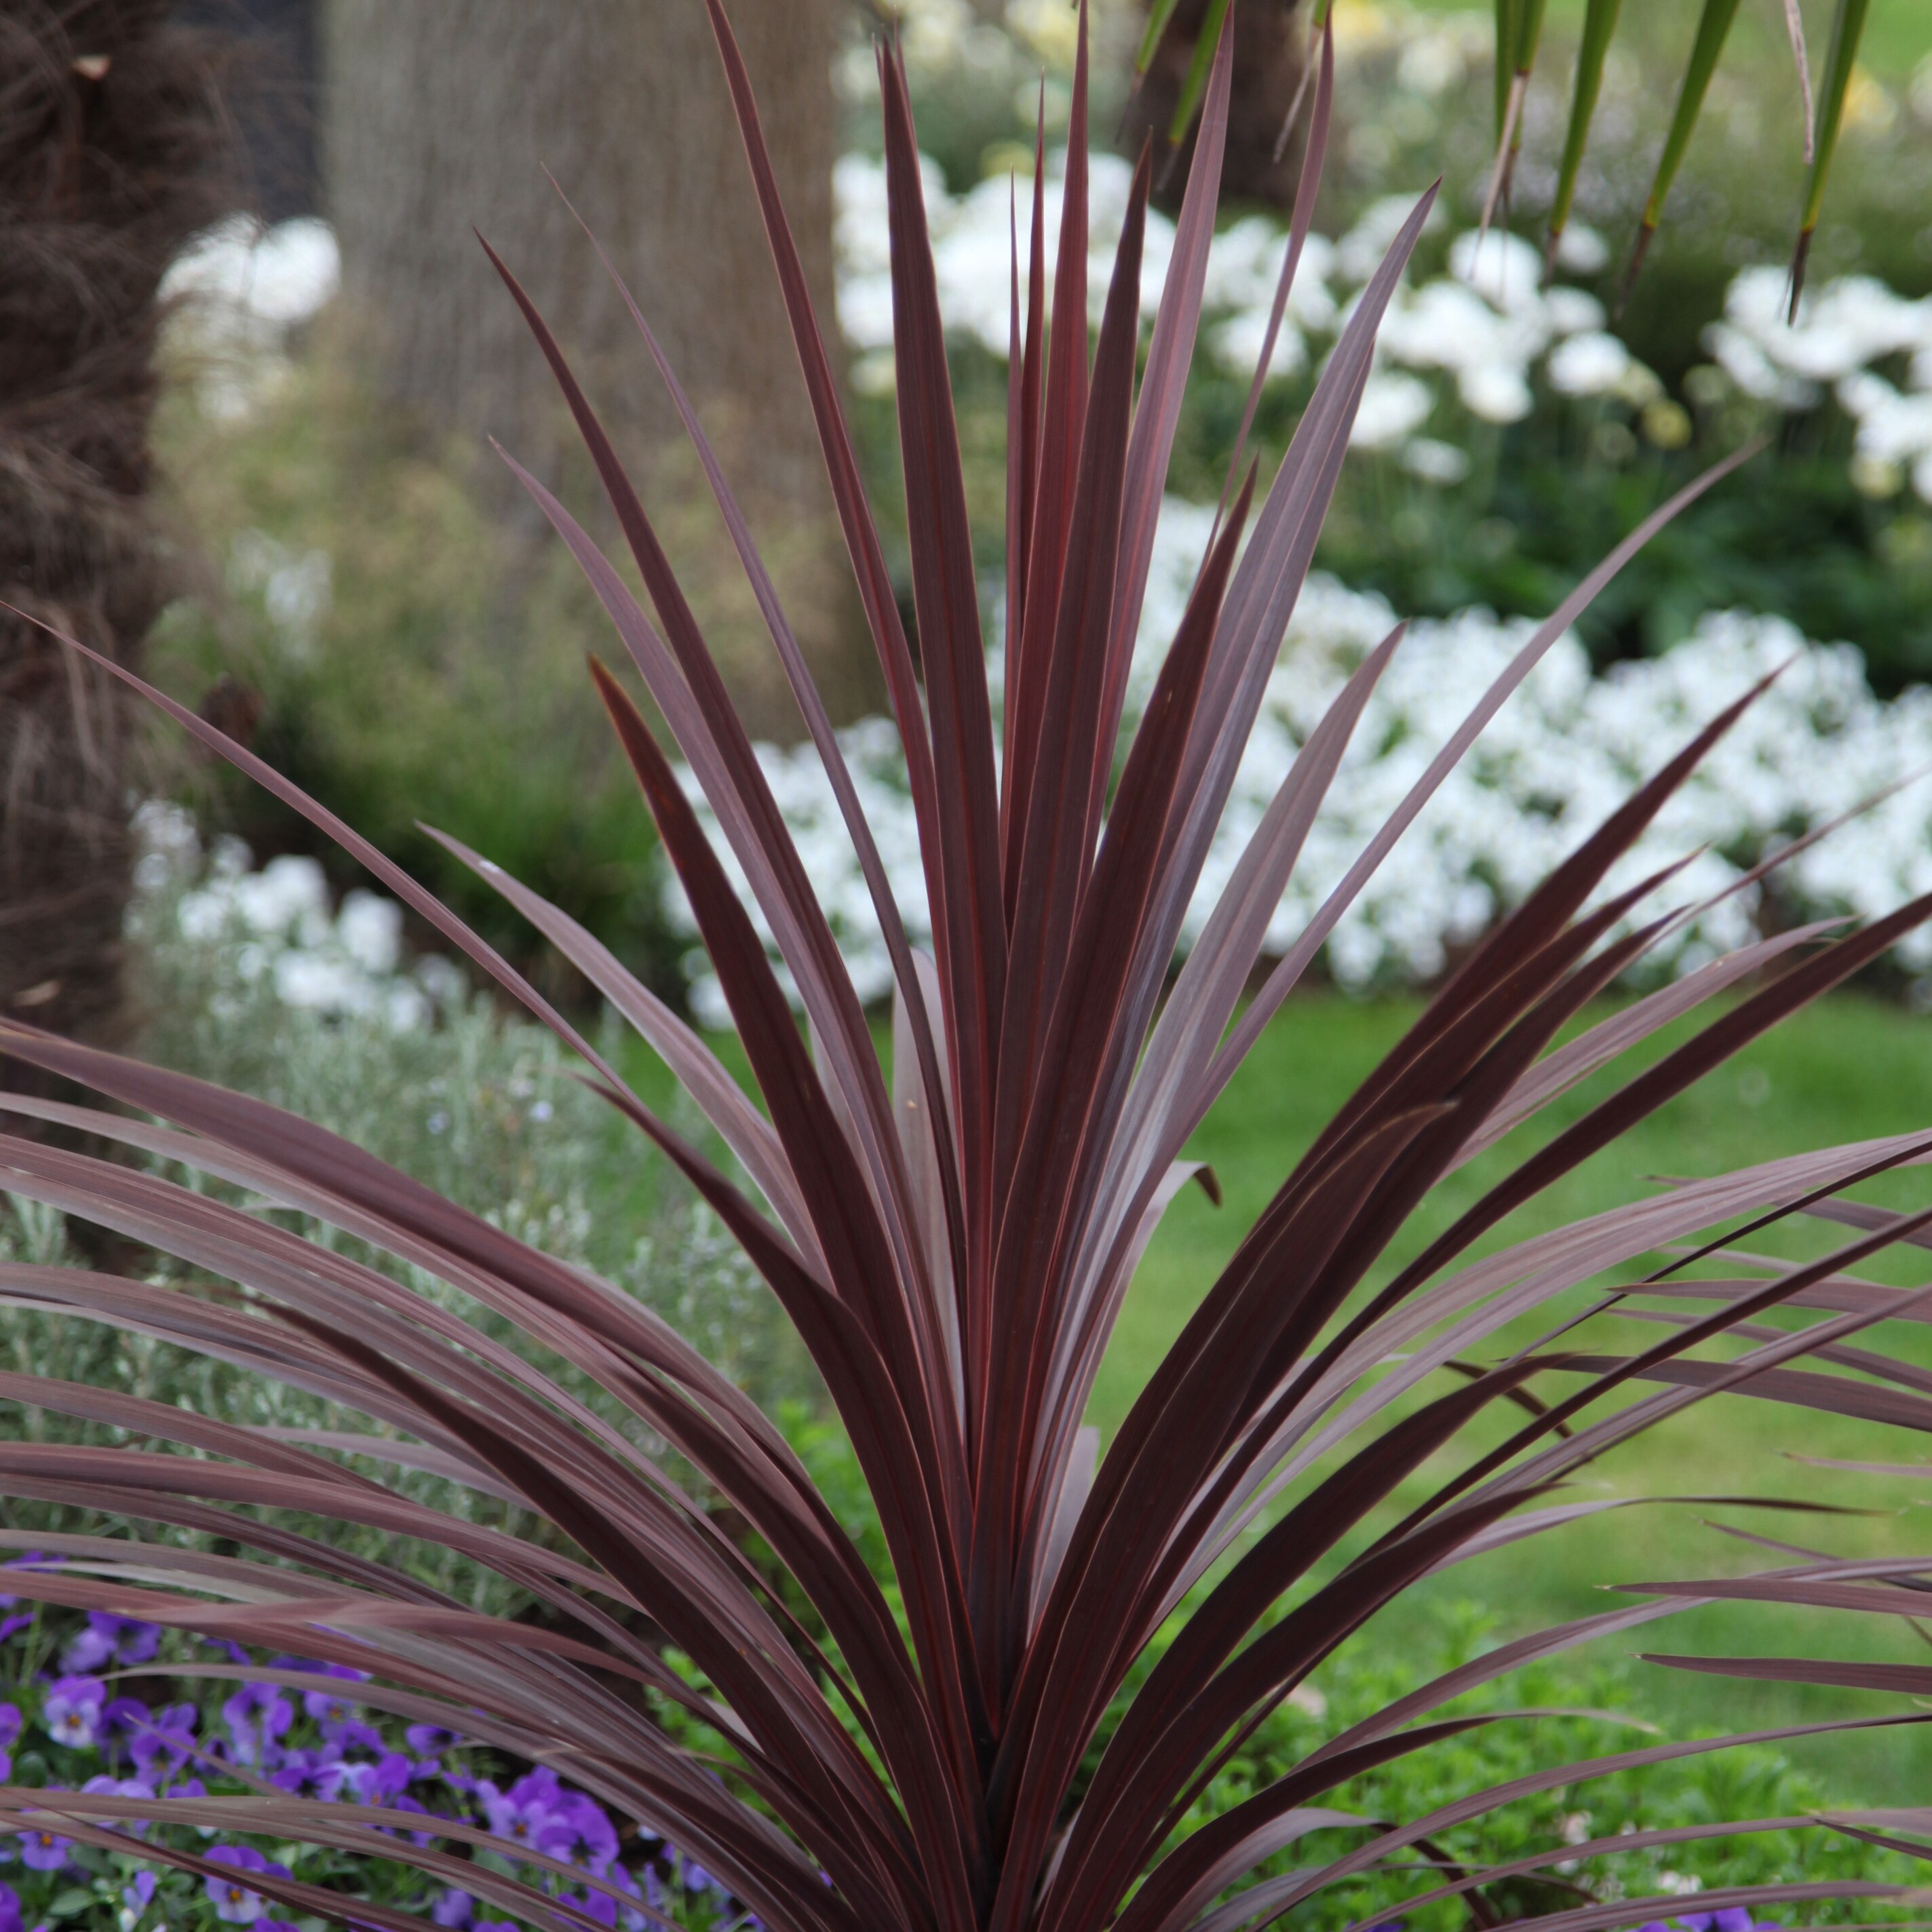 Purple Cabbage Palm 3 Cordyline Australis 'Red Star' 2ft Tall in a 2L Pots